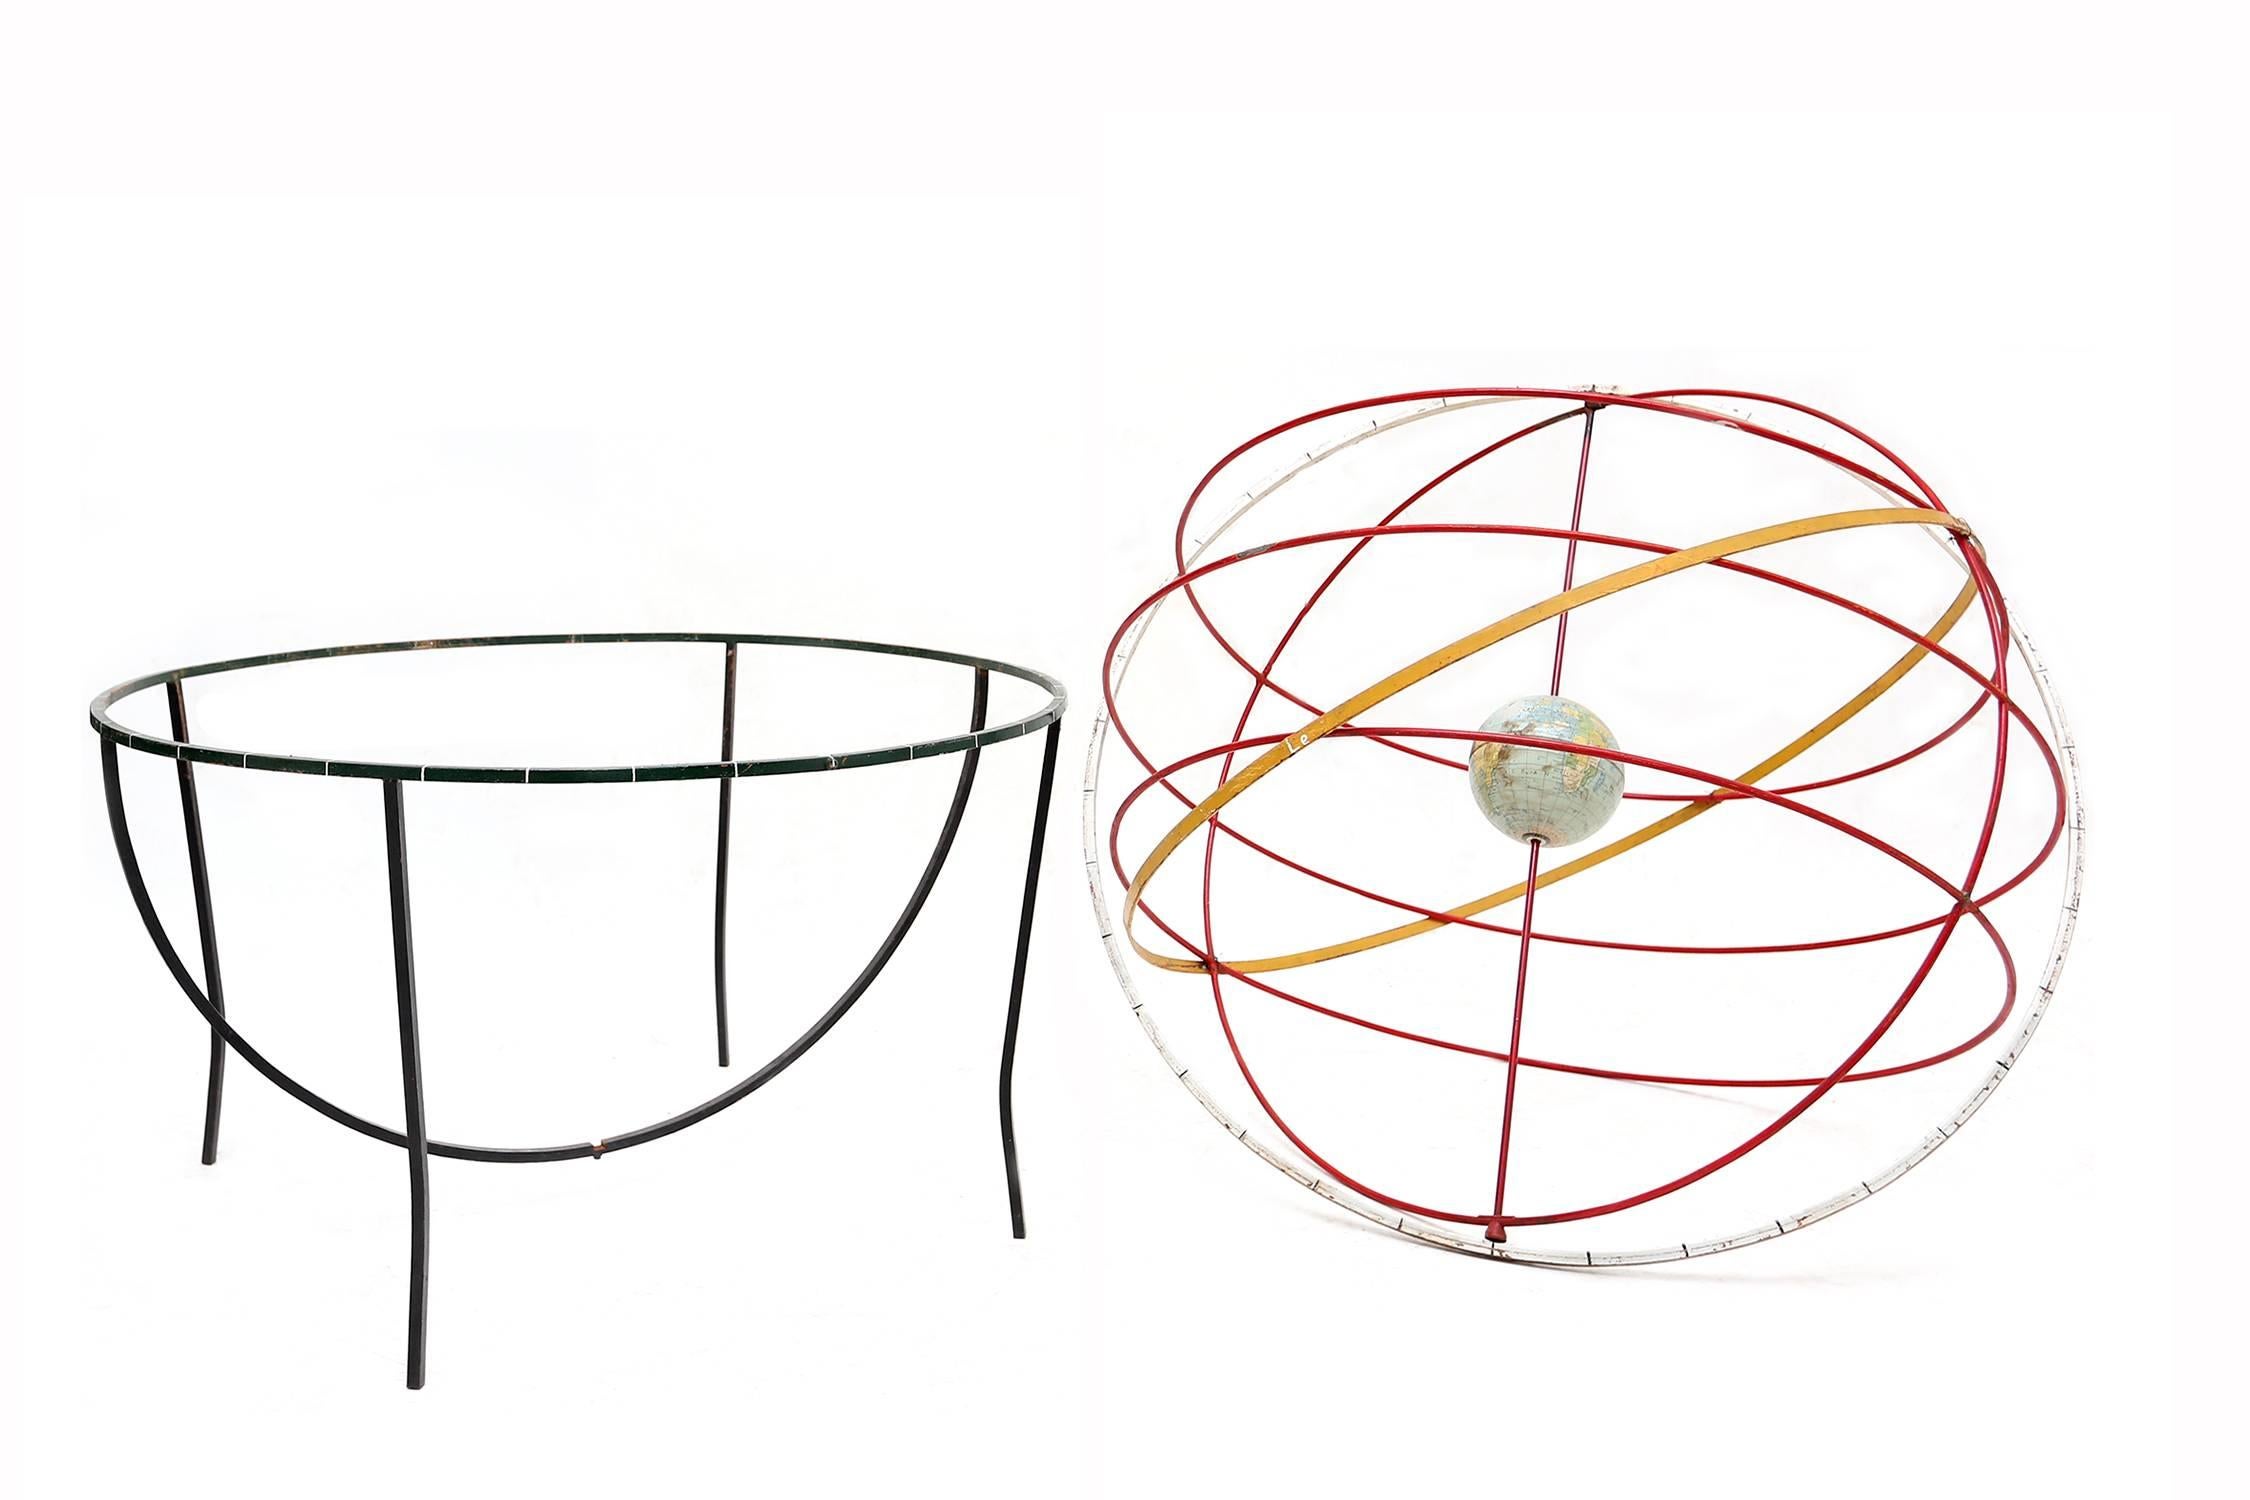 Mid-Century Modern kinetic sculpture of the earth and orbits